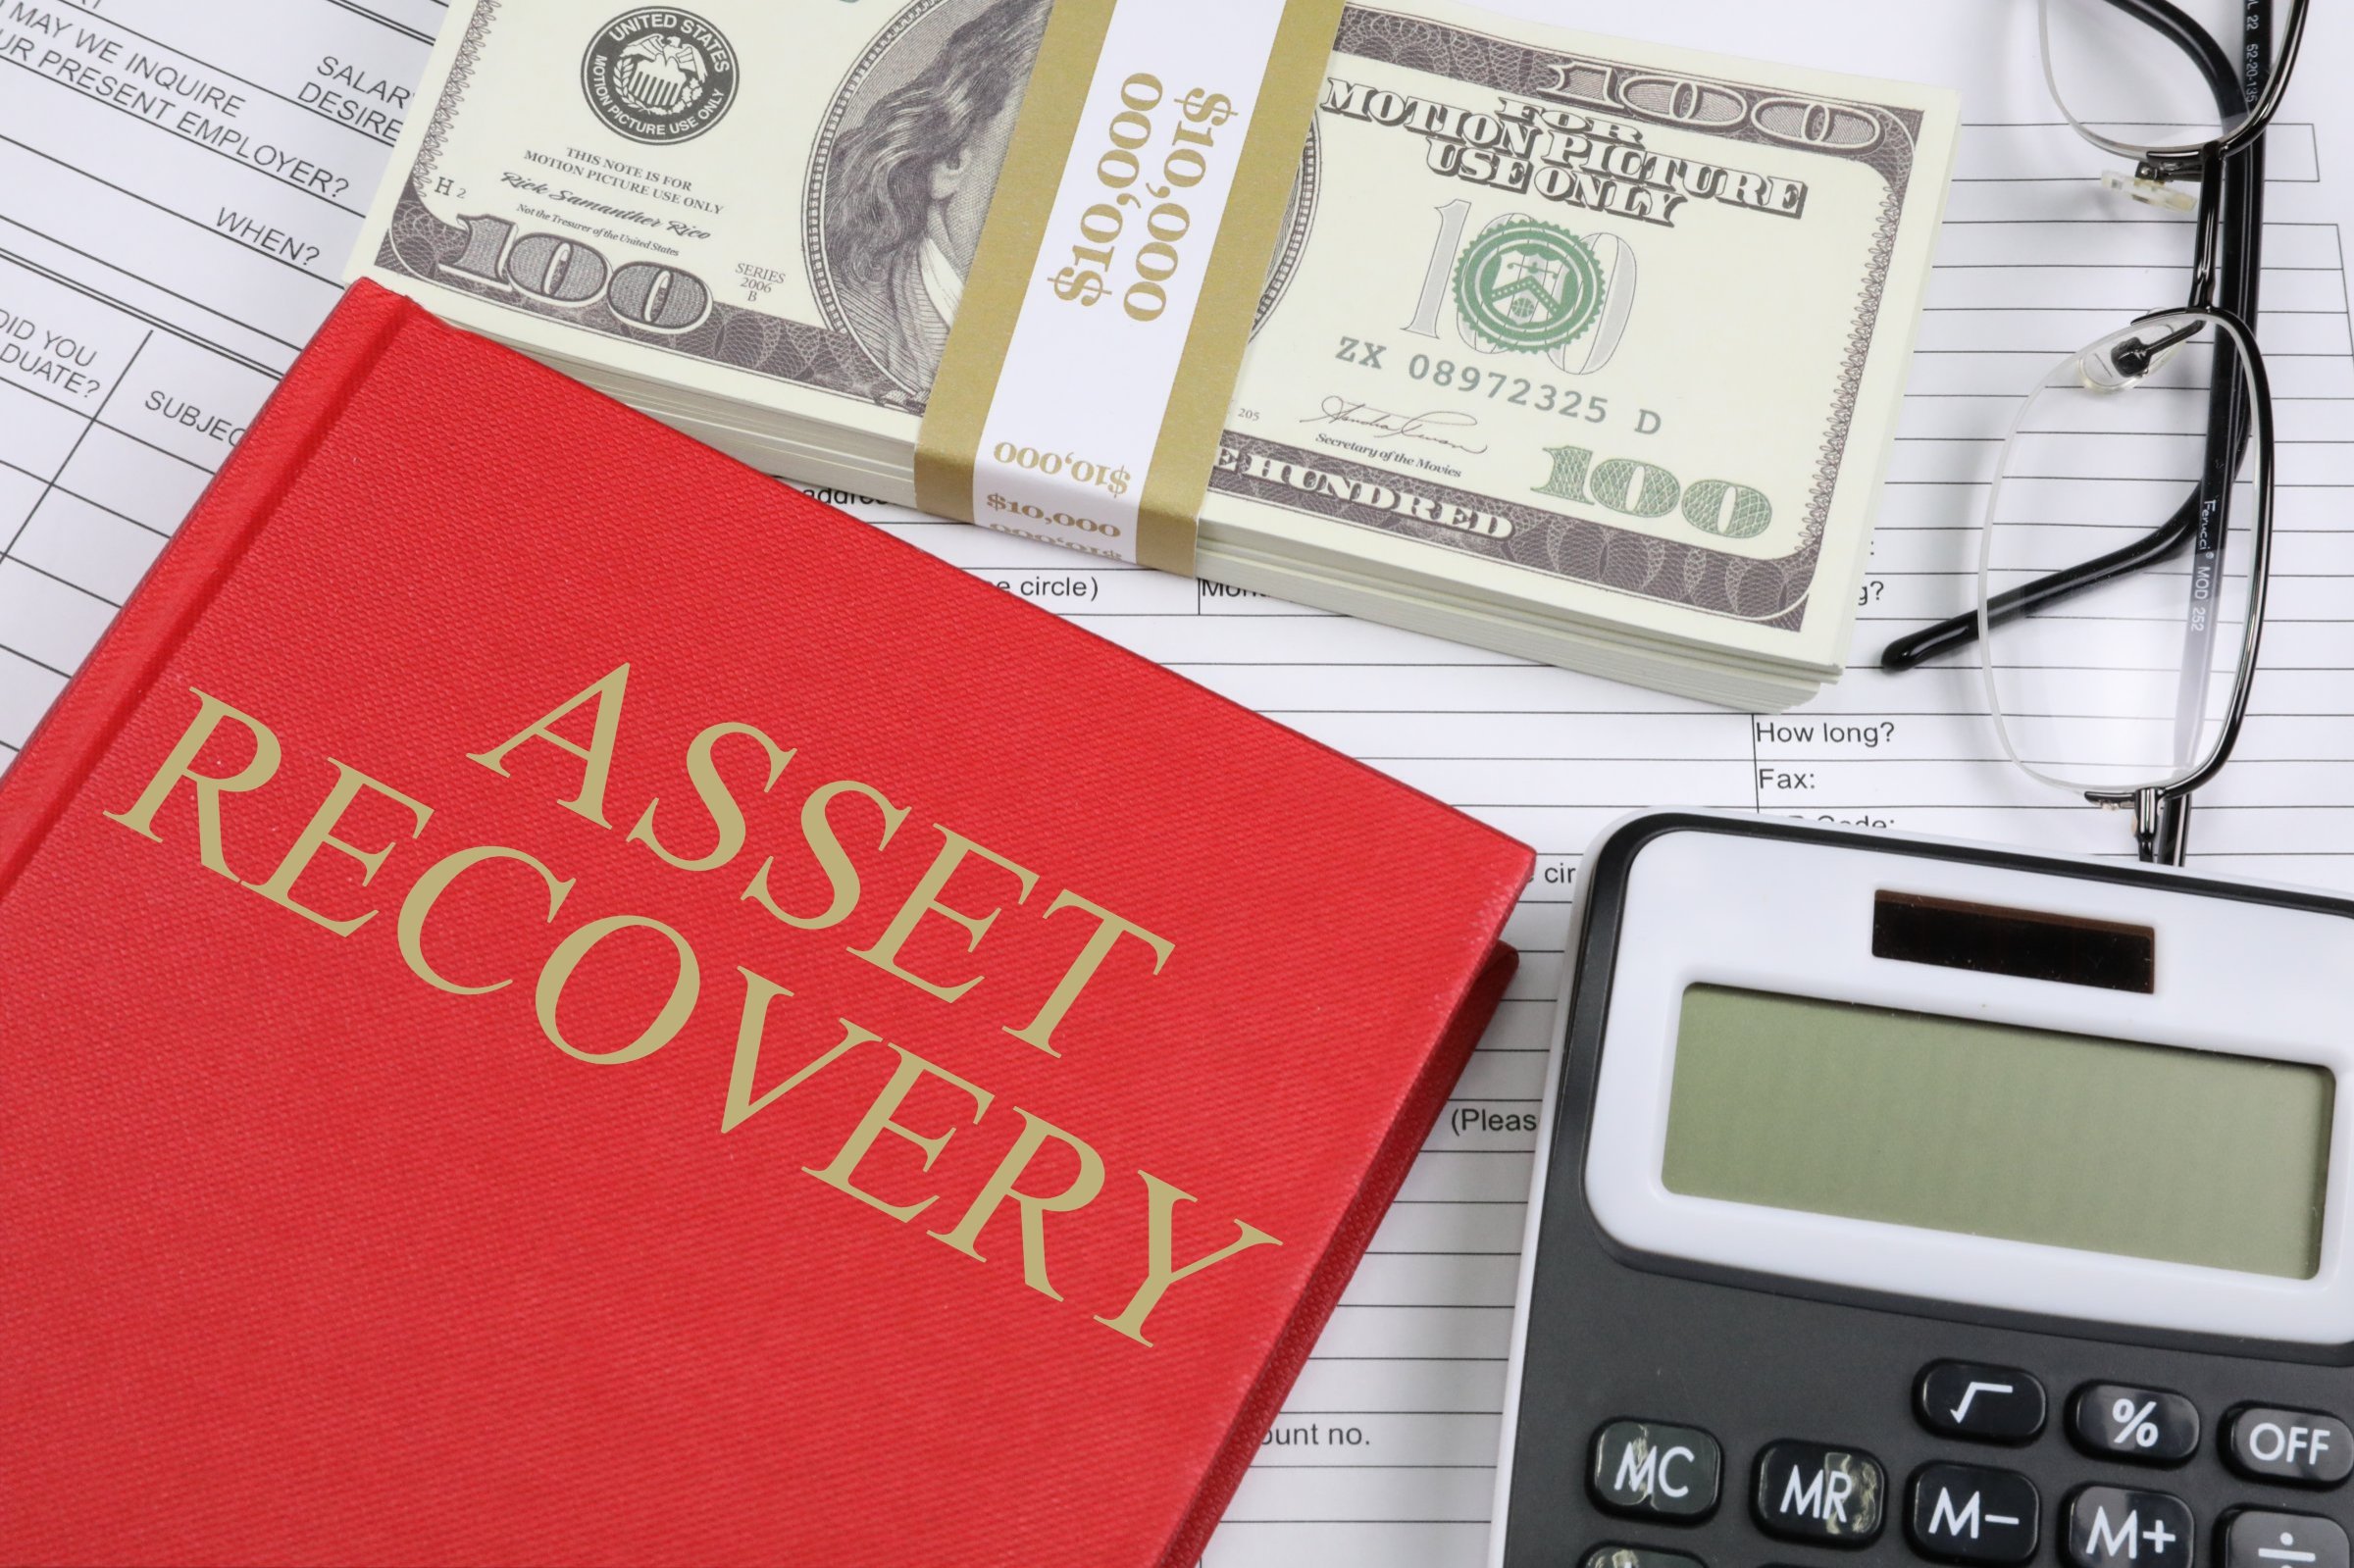 asset recovery